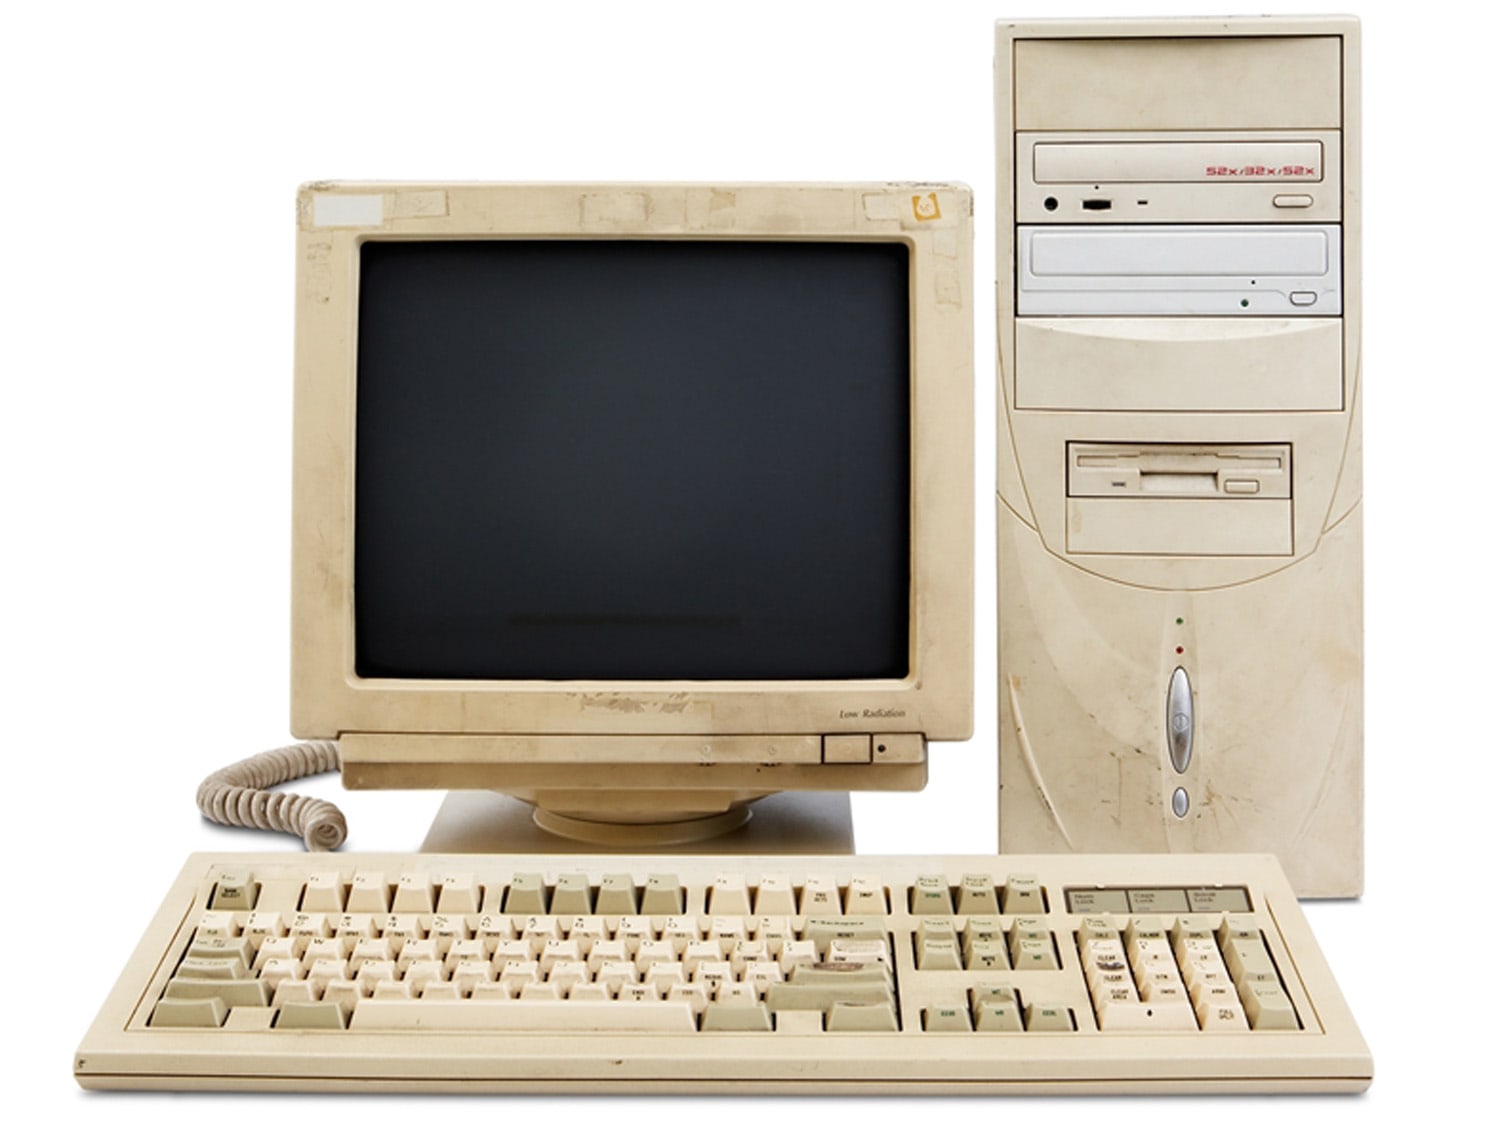 10 ways to make best of old, crappy computer